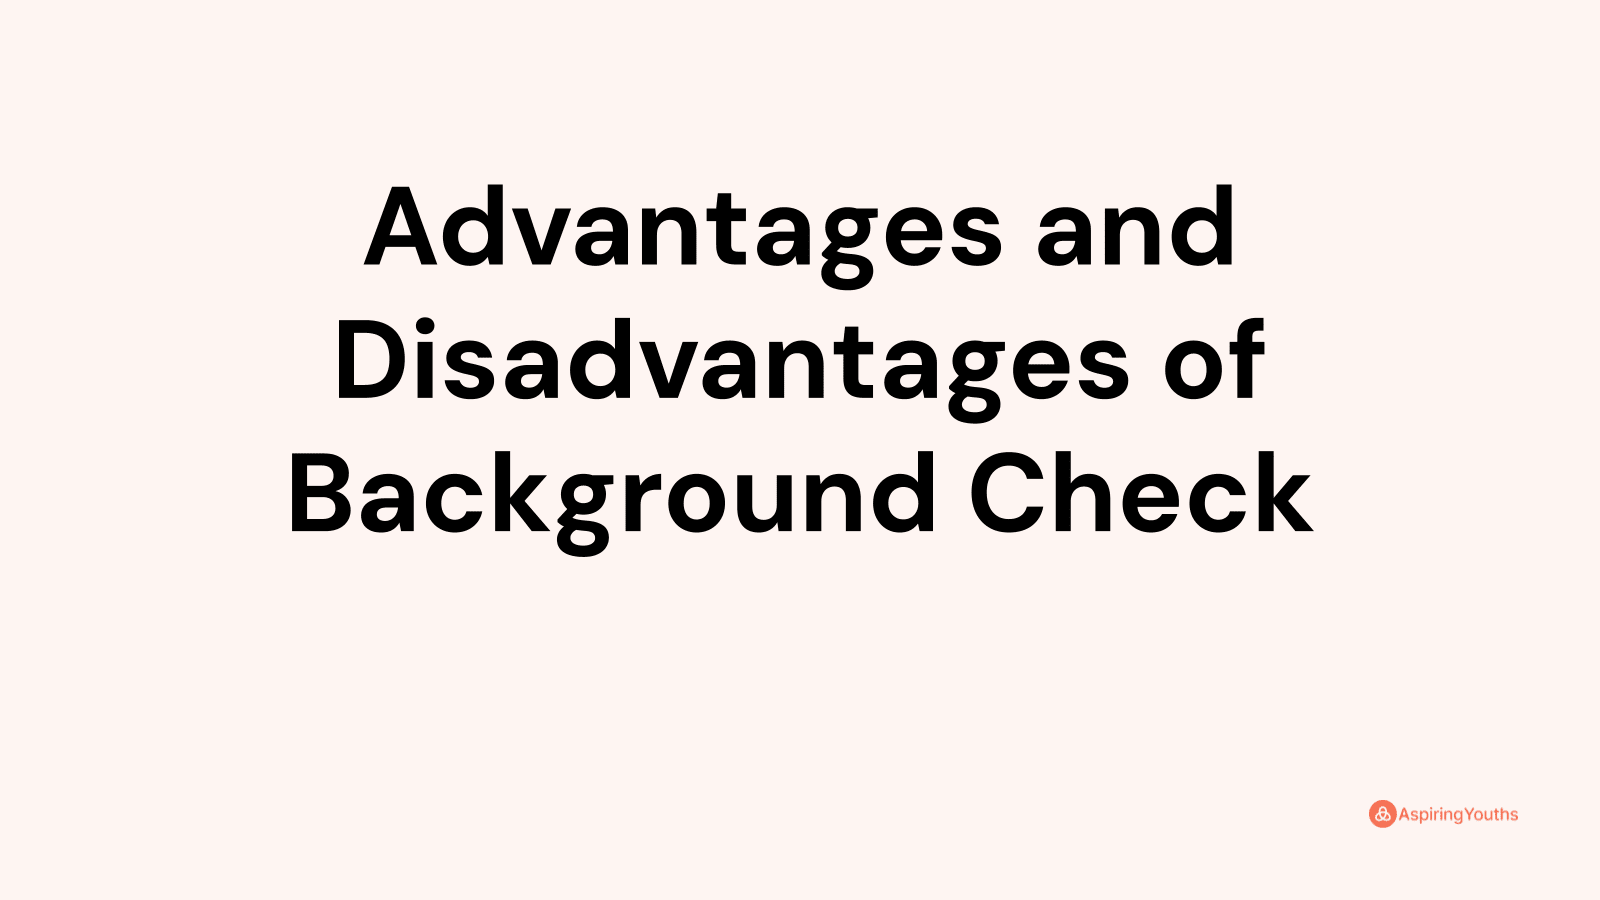 Advantages and disadvantages of Background Check